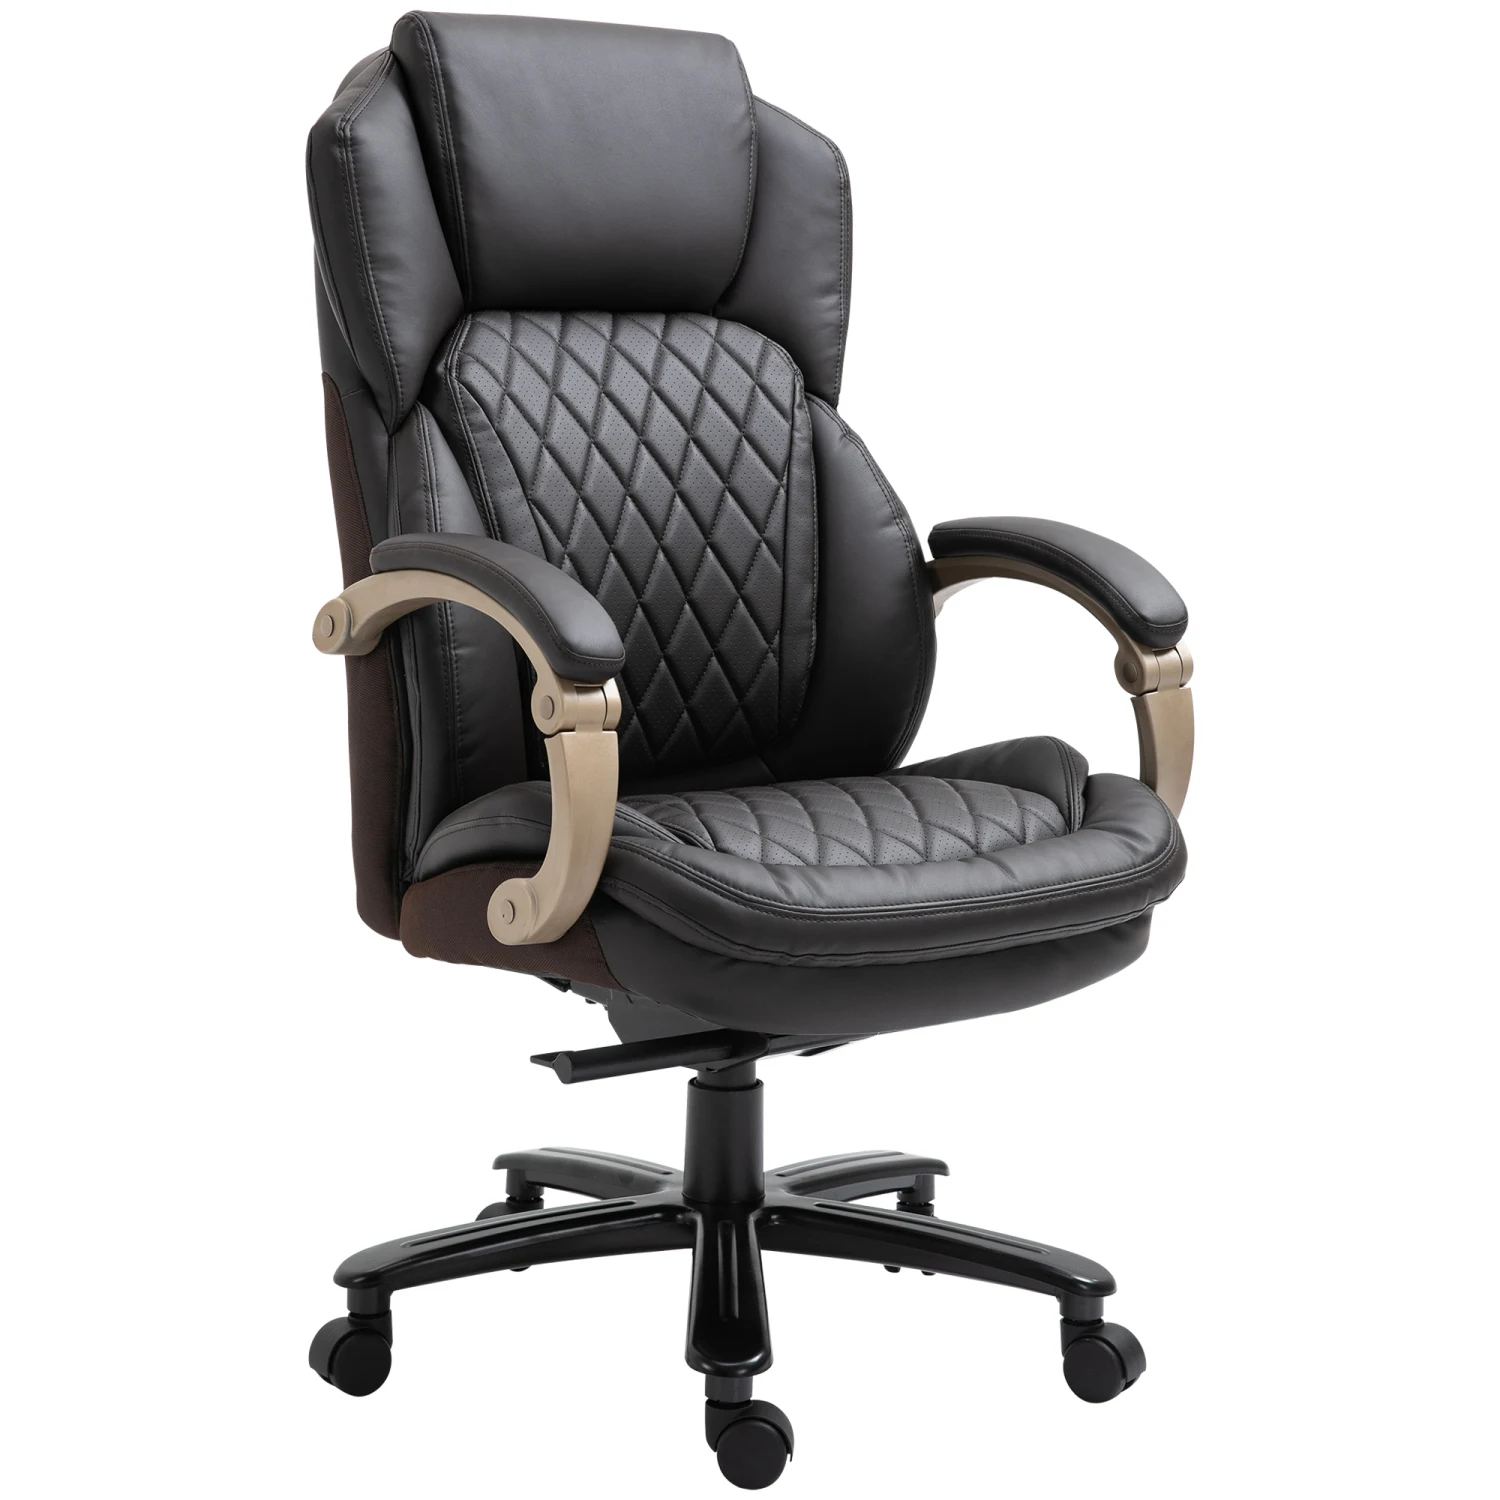 

Big and Tall Executive Office Chair with Wide Seat, Computer Desk Chair with High Back Diamond Stitching, Adjustable Height & Sw